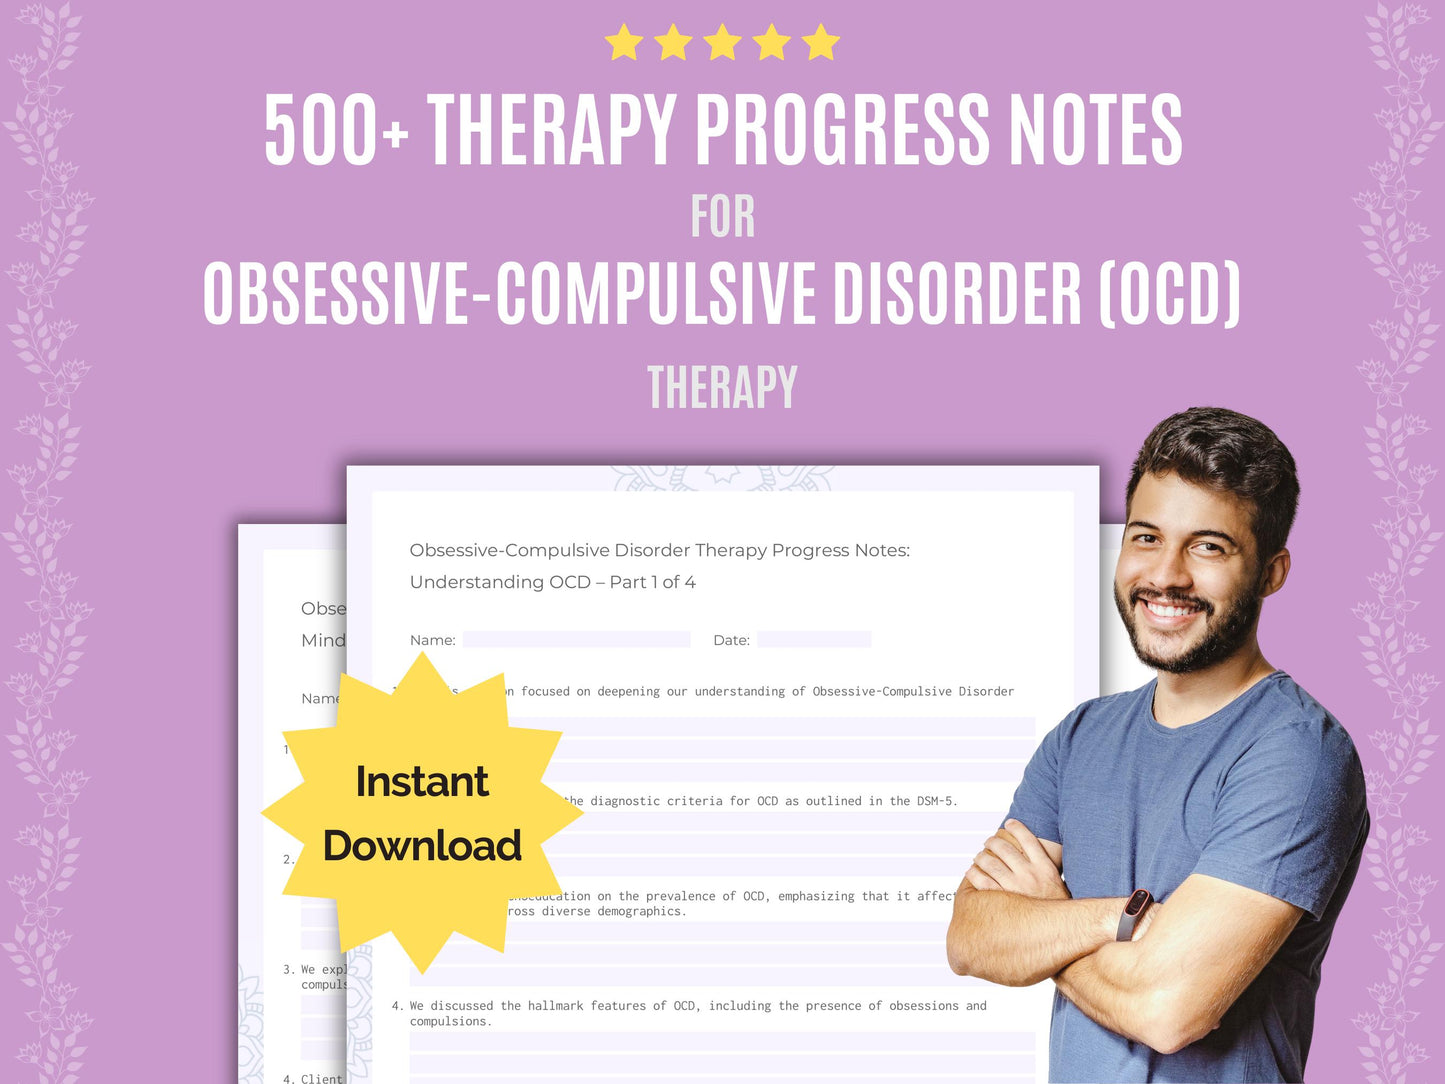 Obsessive-Compulsive Disorder (OCD) Therapy Progress Notes Resource